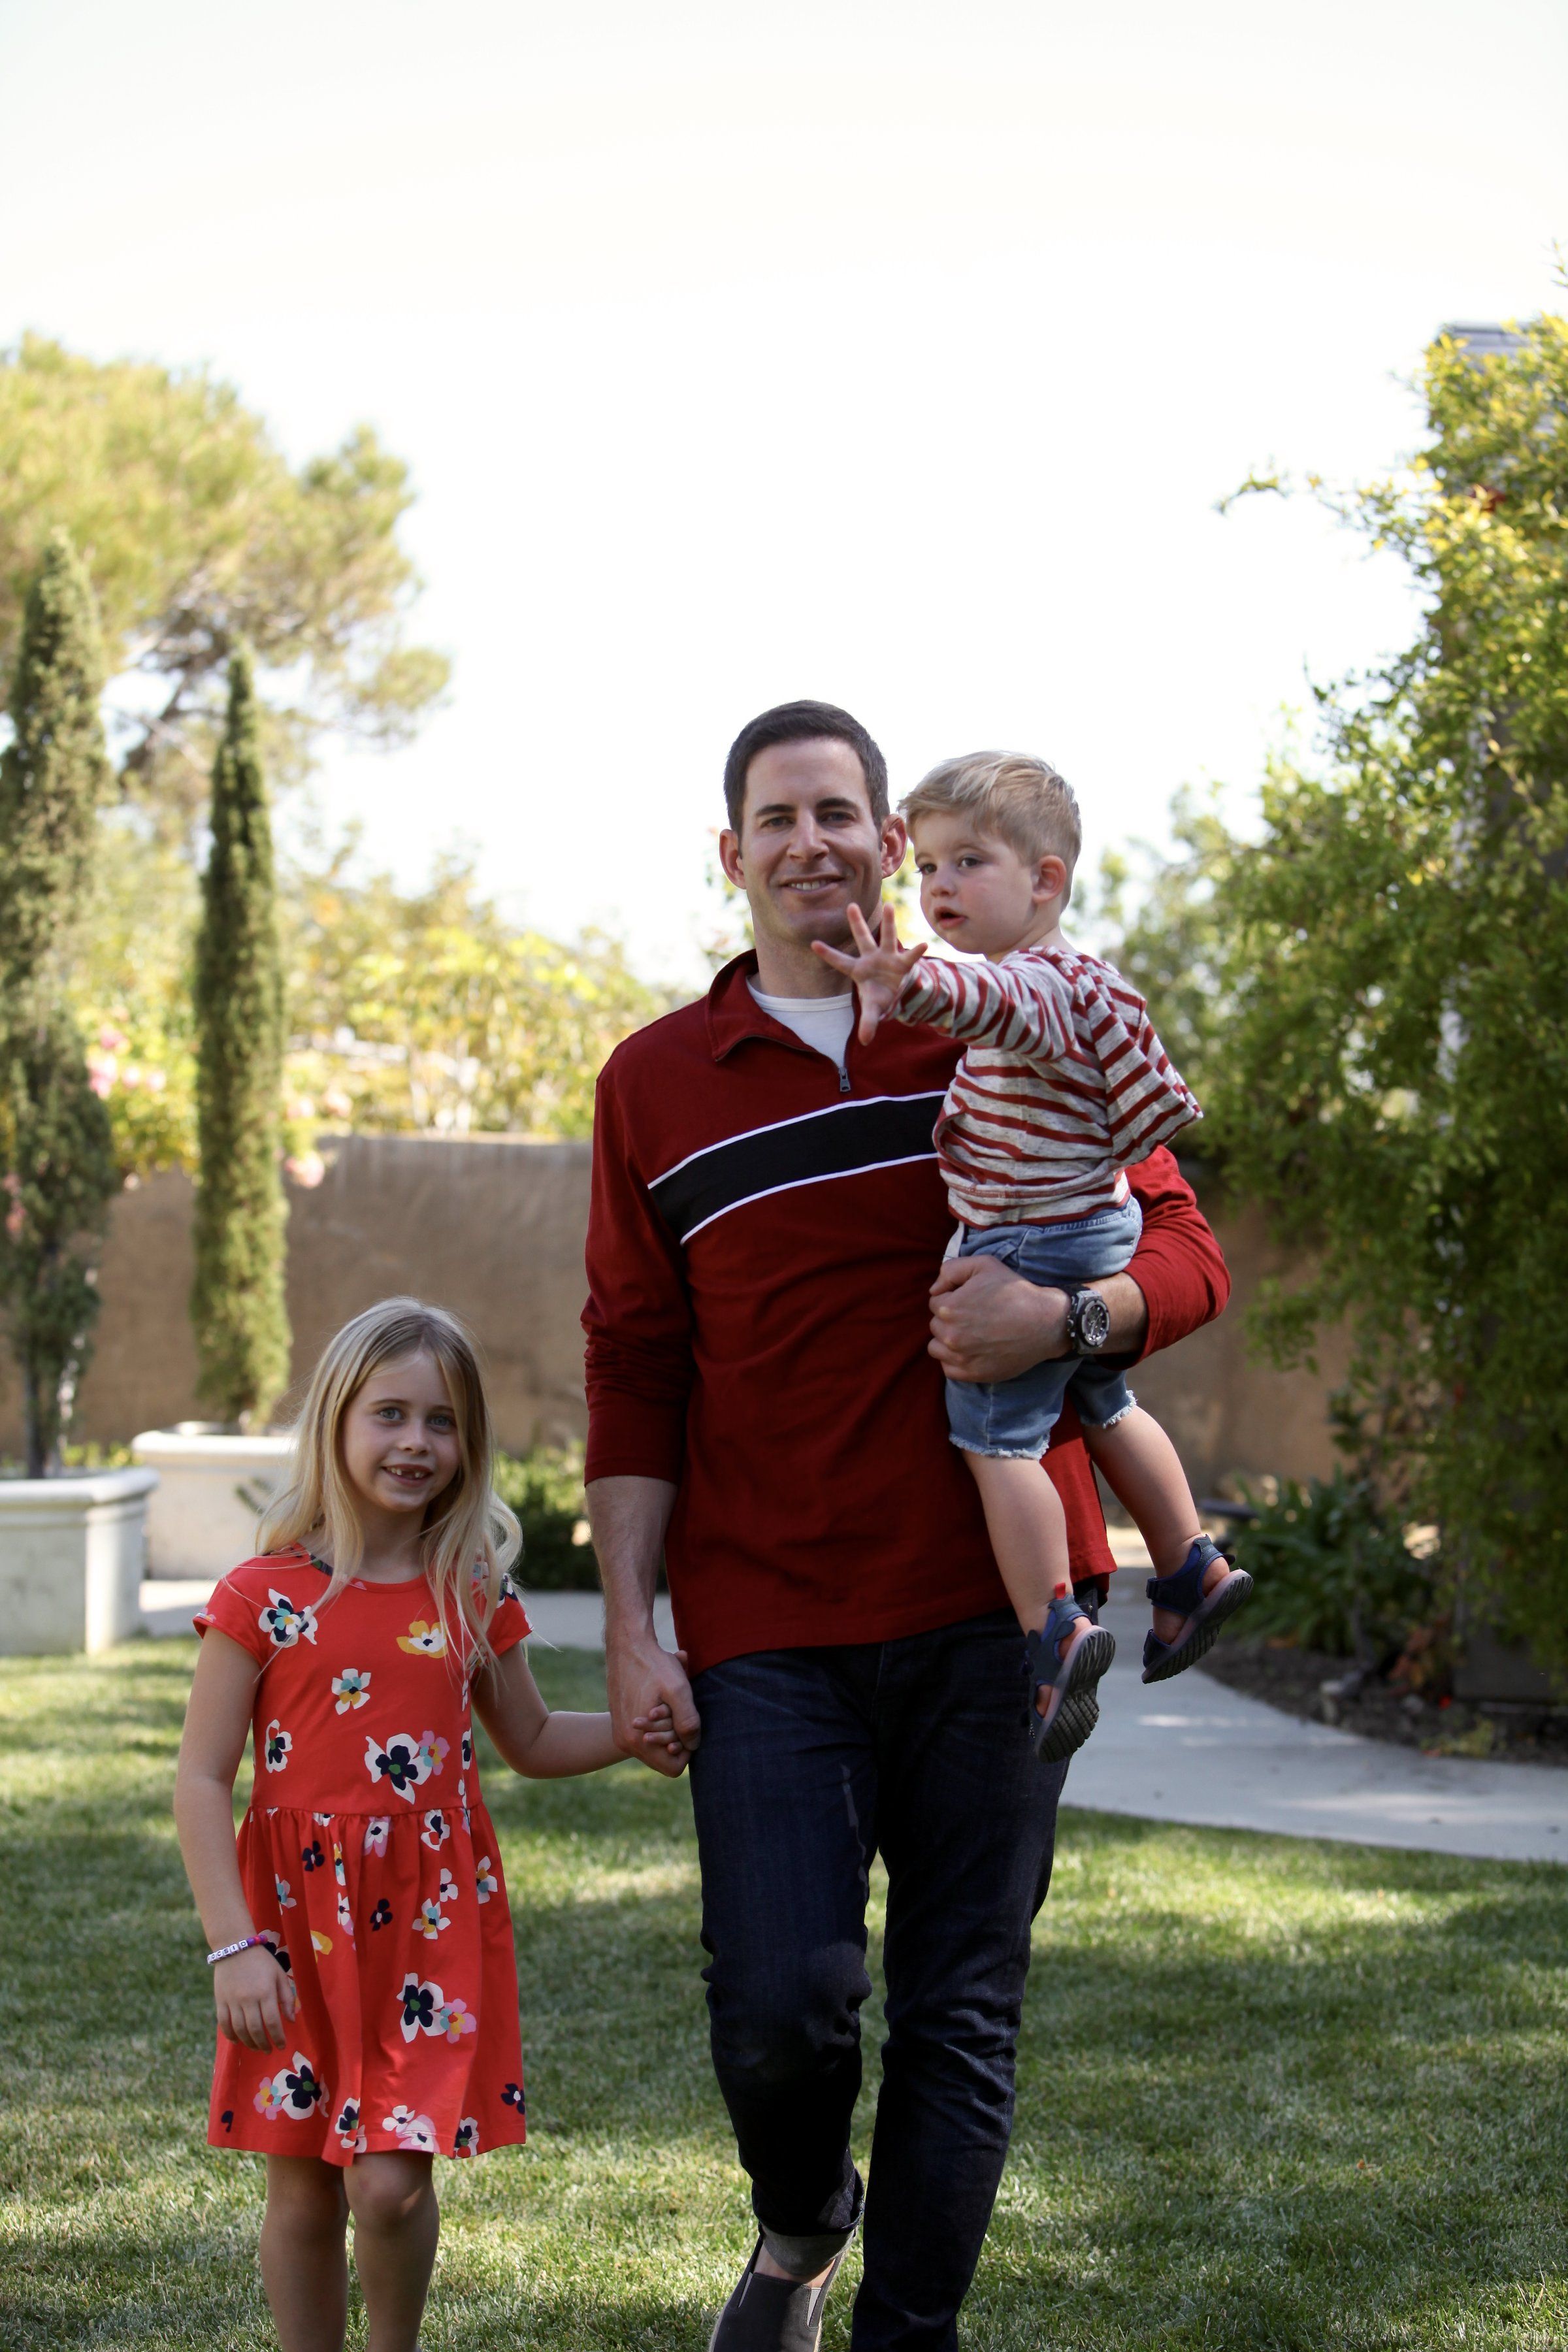 Tarek El Moussa Reveals Which Of His Kids Could Pursue Career In